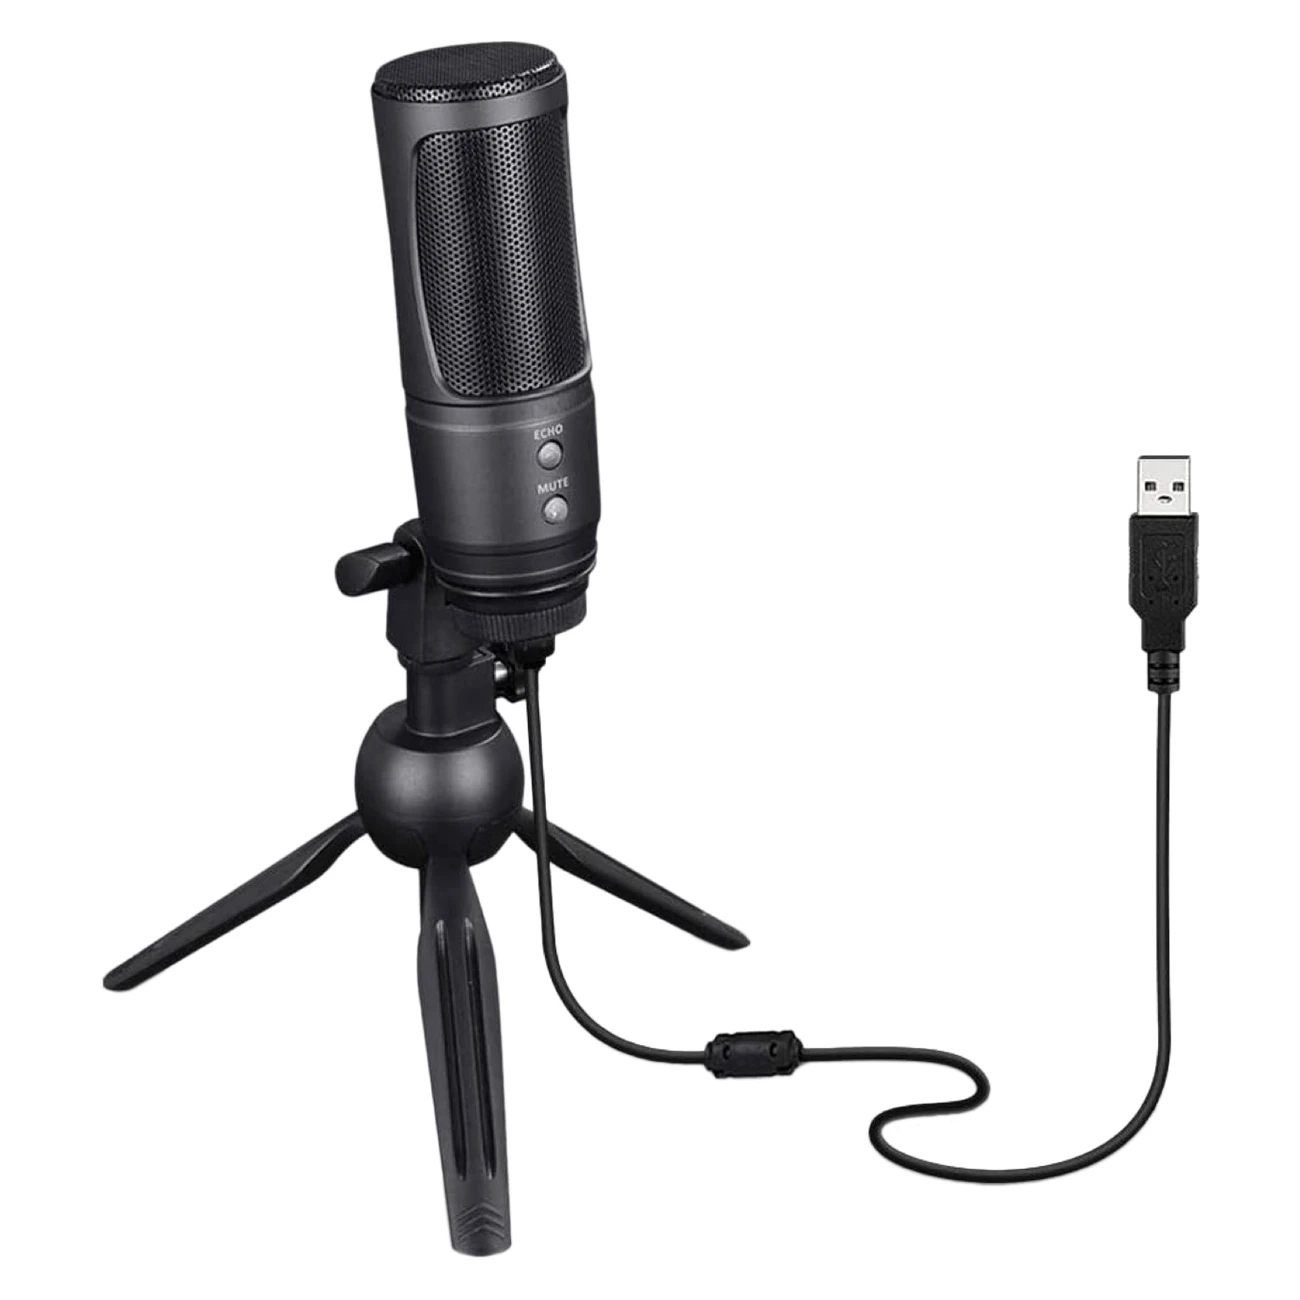 

USB Microphone Pc Condenser Microphone Cardioid Pickup for Voice Recording Streaming Podcasting Games